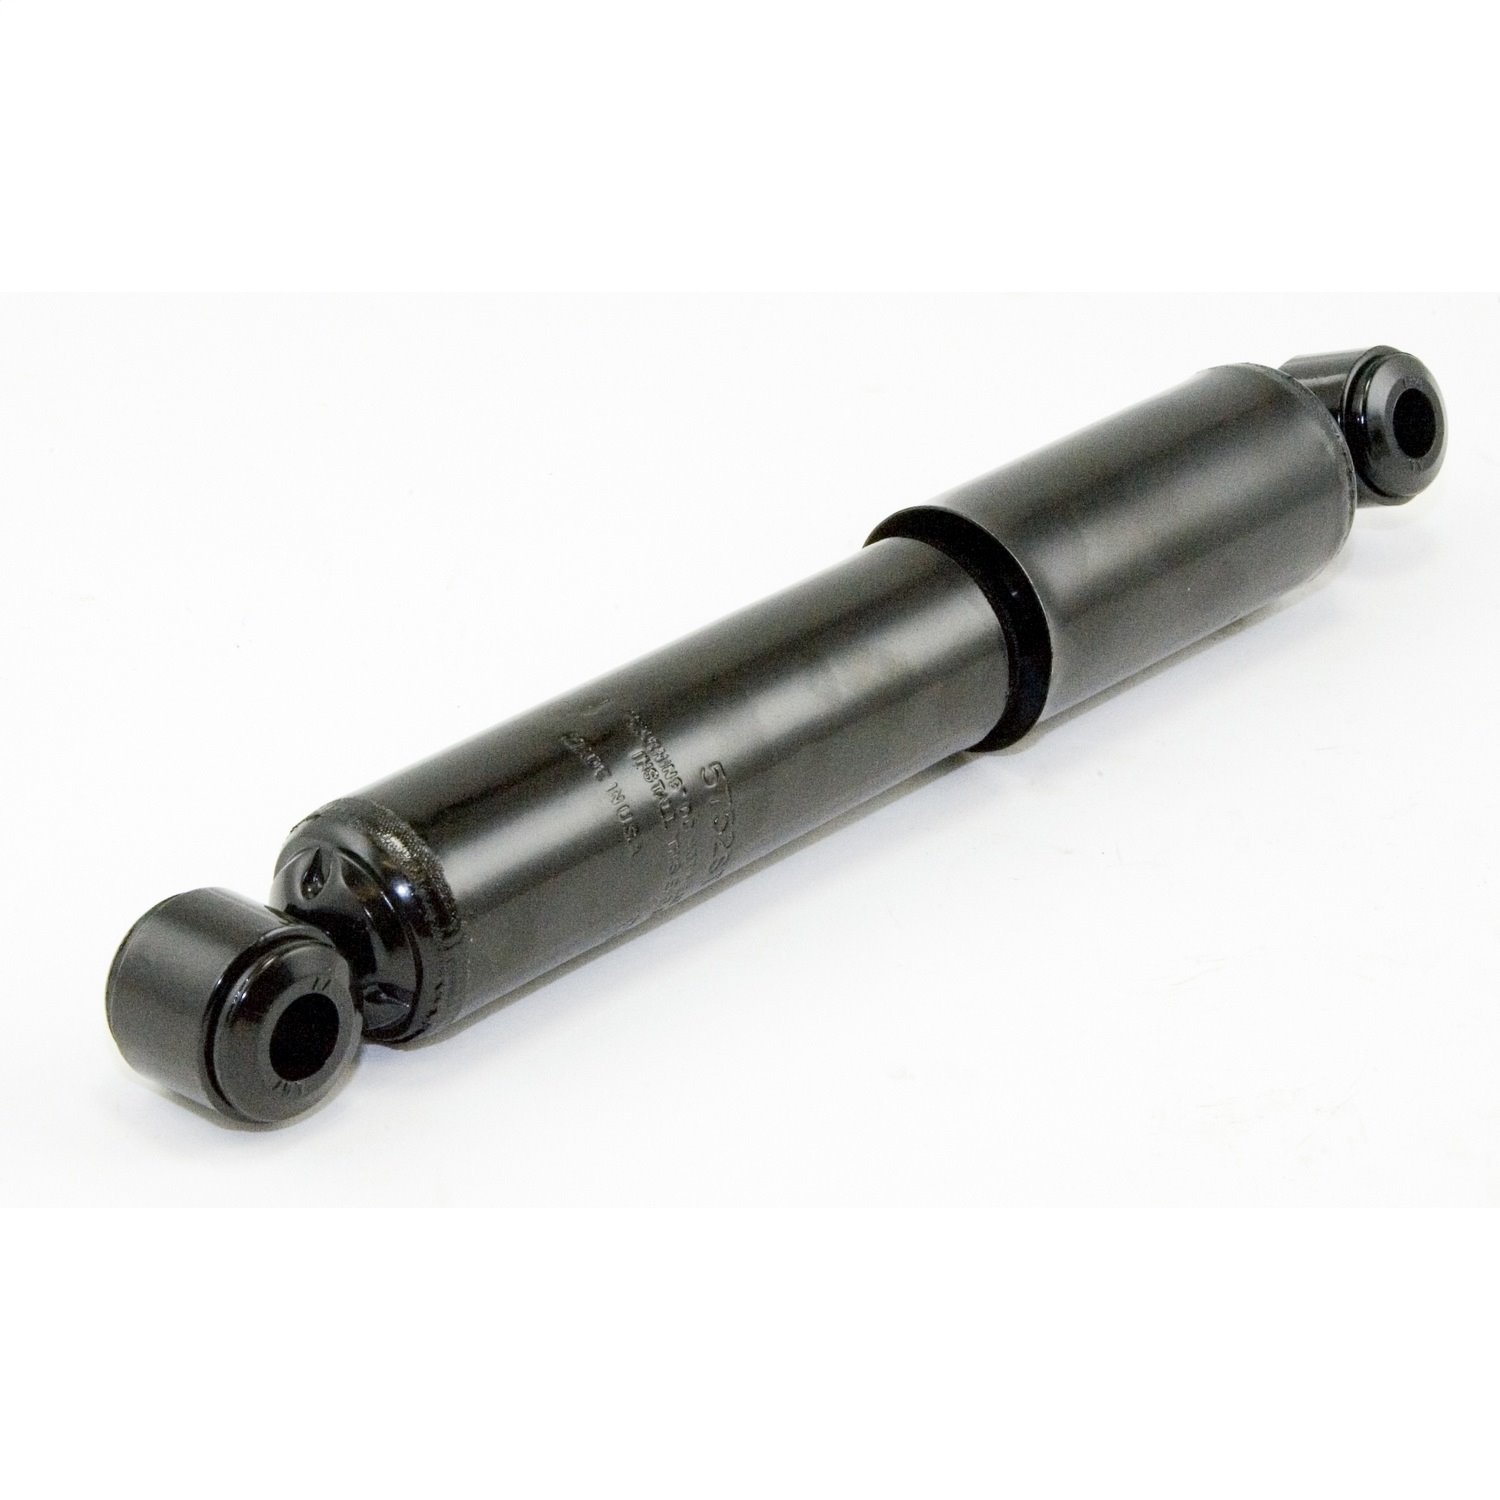 Replacement front shock absorber from Omix-ADA, Fits 47-54